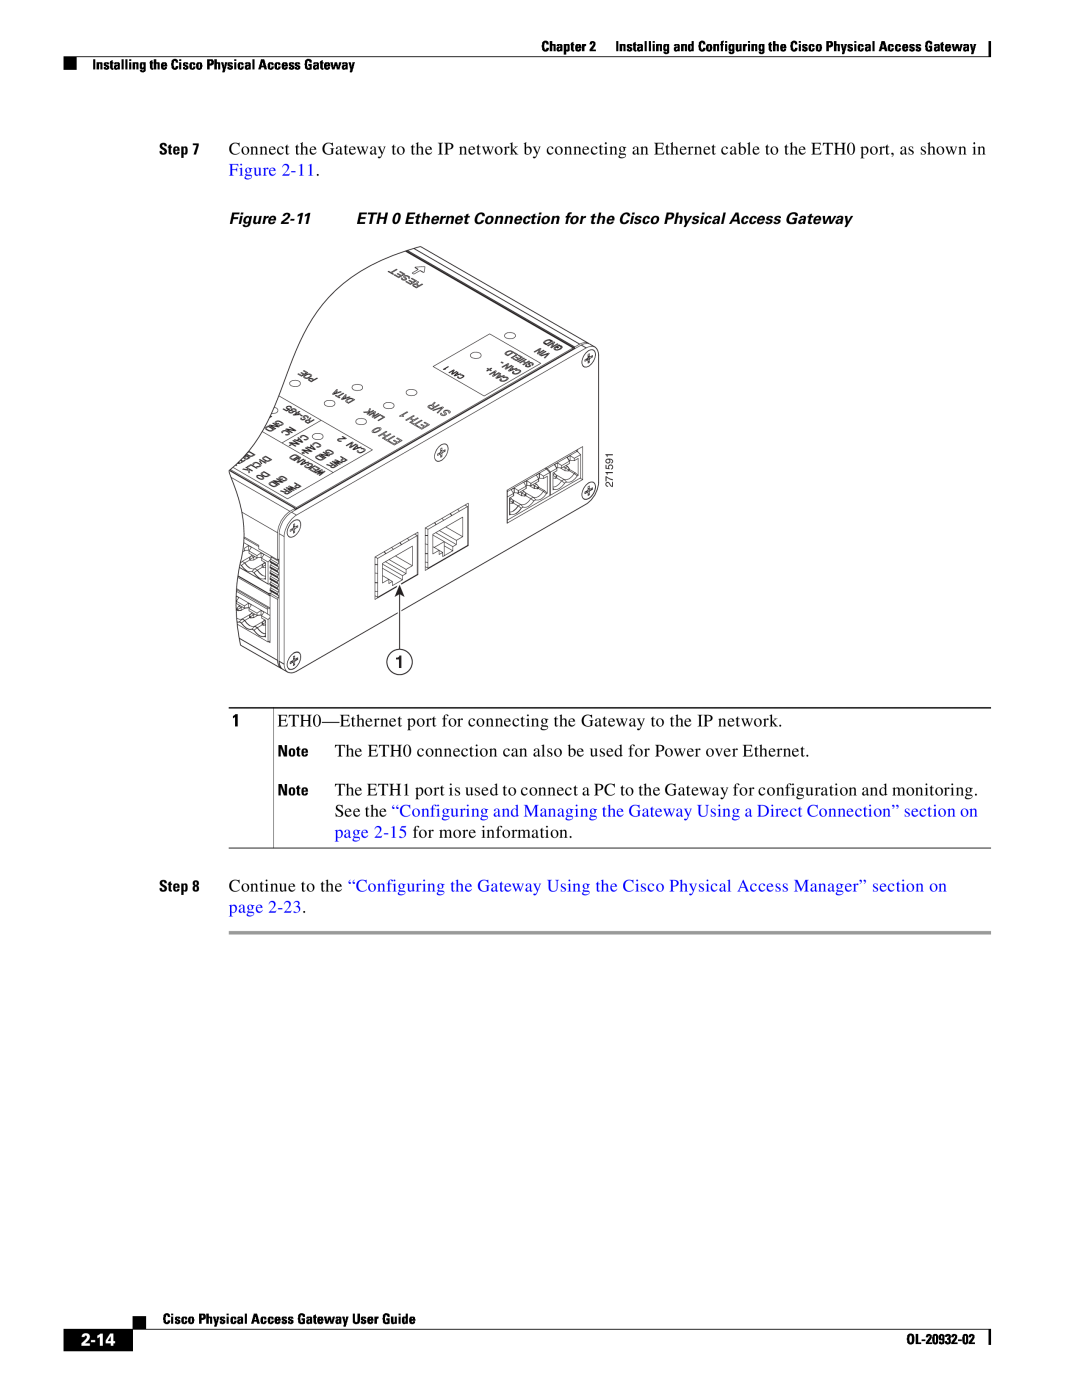 Cisco Systems OL-20932-02 manual 2-14, ETH0-Ethernet port for connecting the Gateway to the IP network 